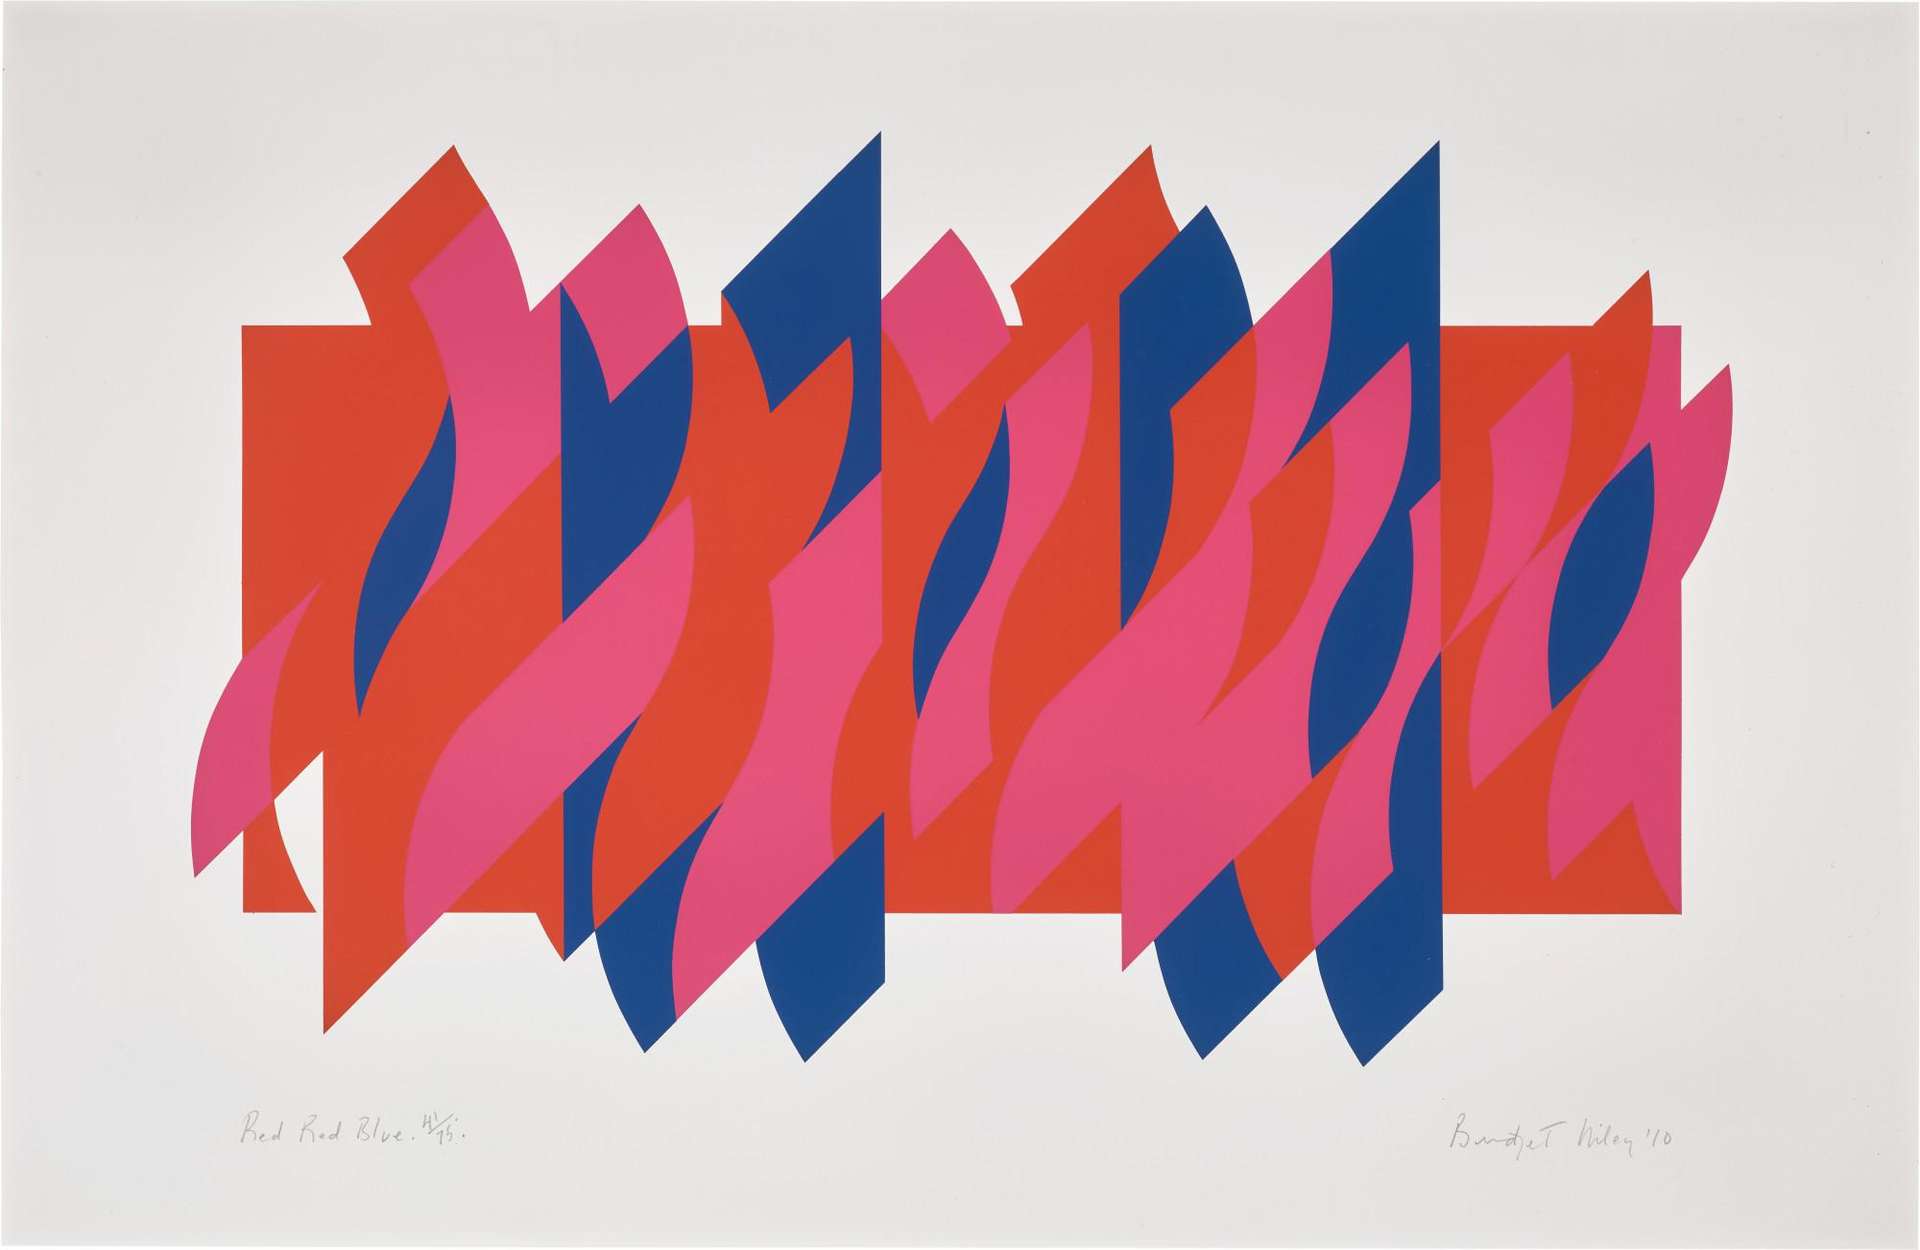 Bridget Riley’s Red Red Blue. An Op Art screenprint of combined blue, red, and pink geometric shapes in front of a red rectangle against a white background.